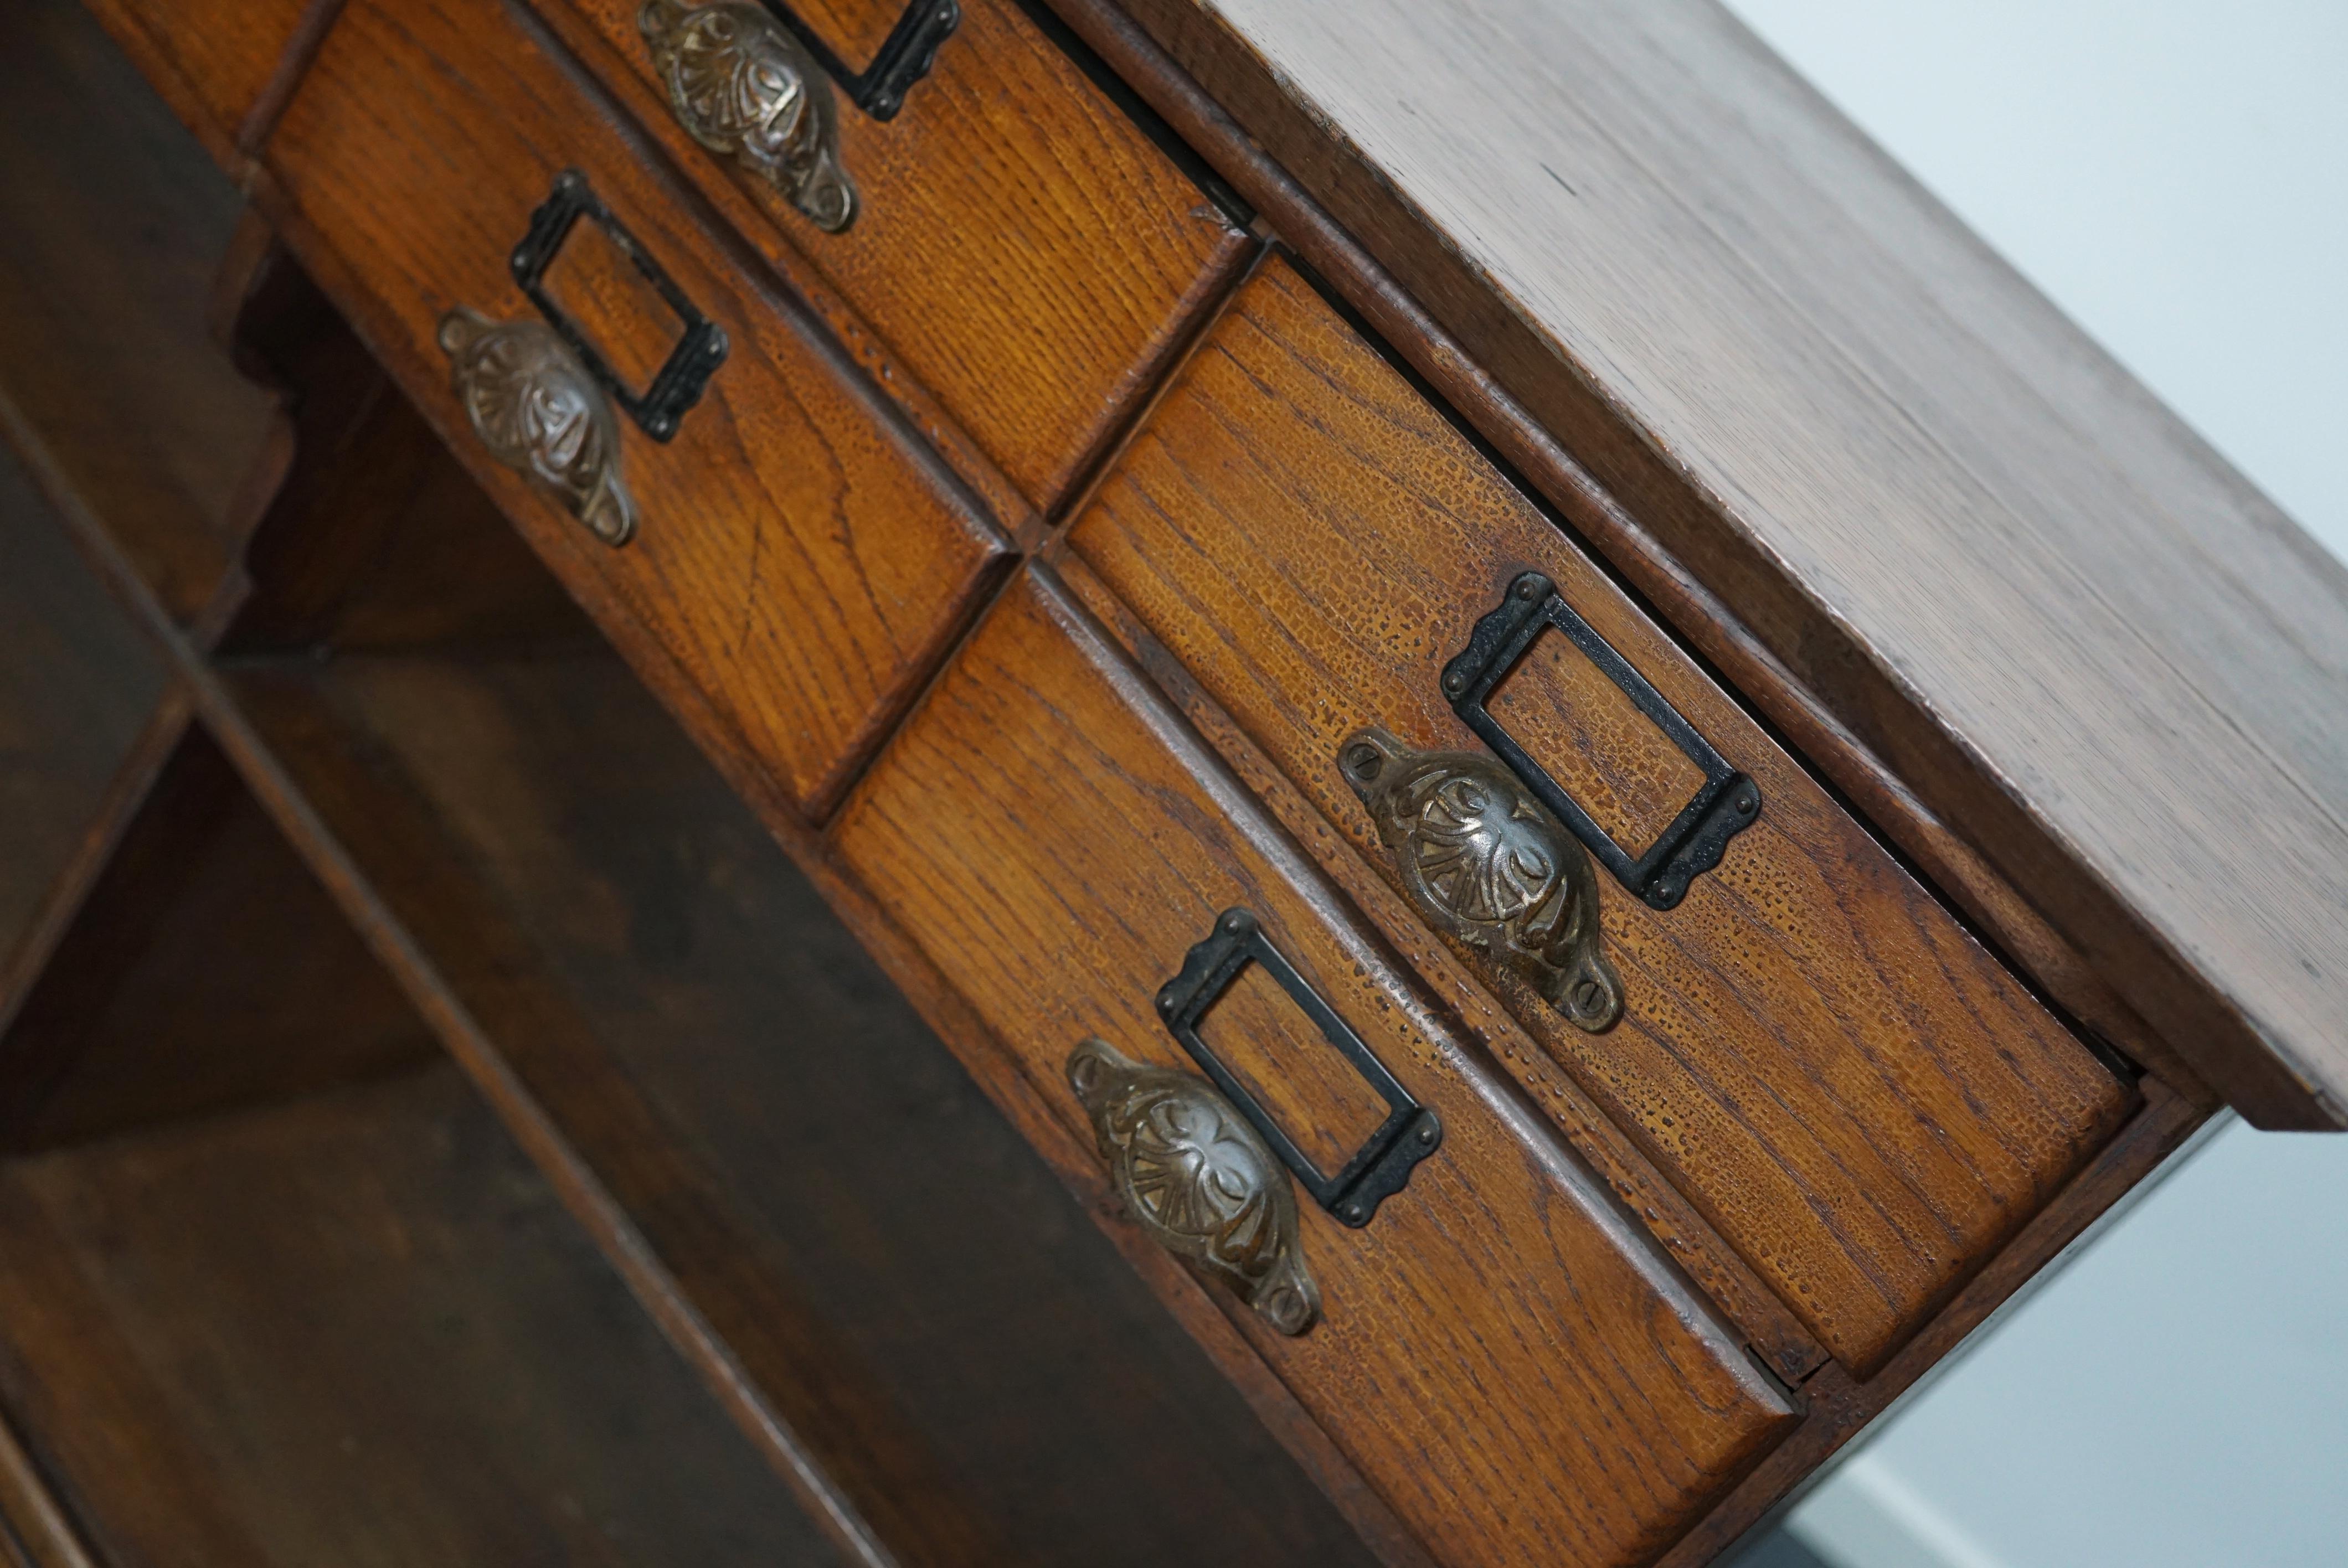 Nice 19th century French oak cabinet most likely from a general store to display items. It features drawers with cast iron handles in the top and shelves in the bottom. The cabinet has retained a very rich patina over the years. The interior